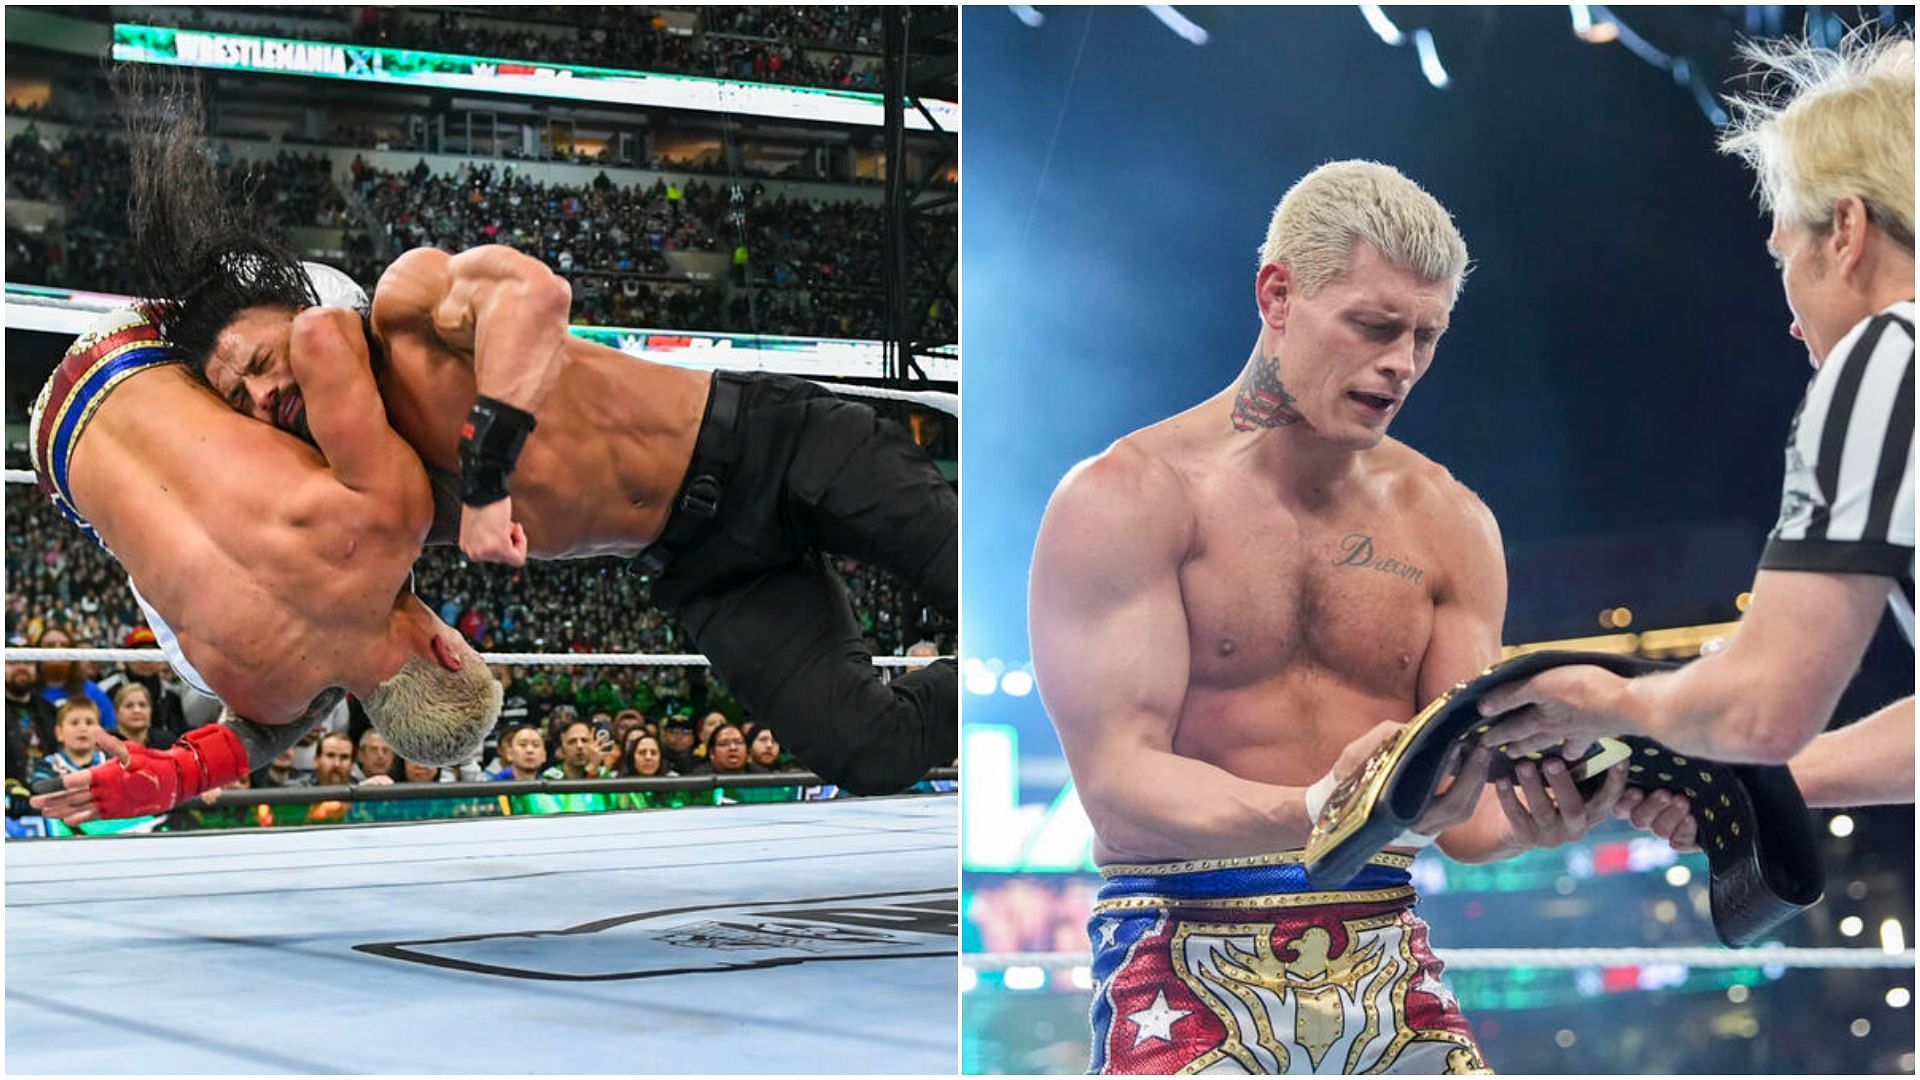 Cody Rhodes defeated Roman Reigns at WWE WrestleMania.